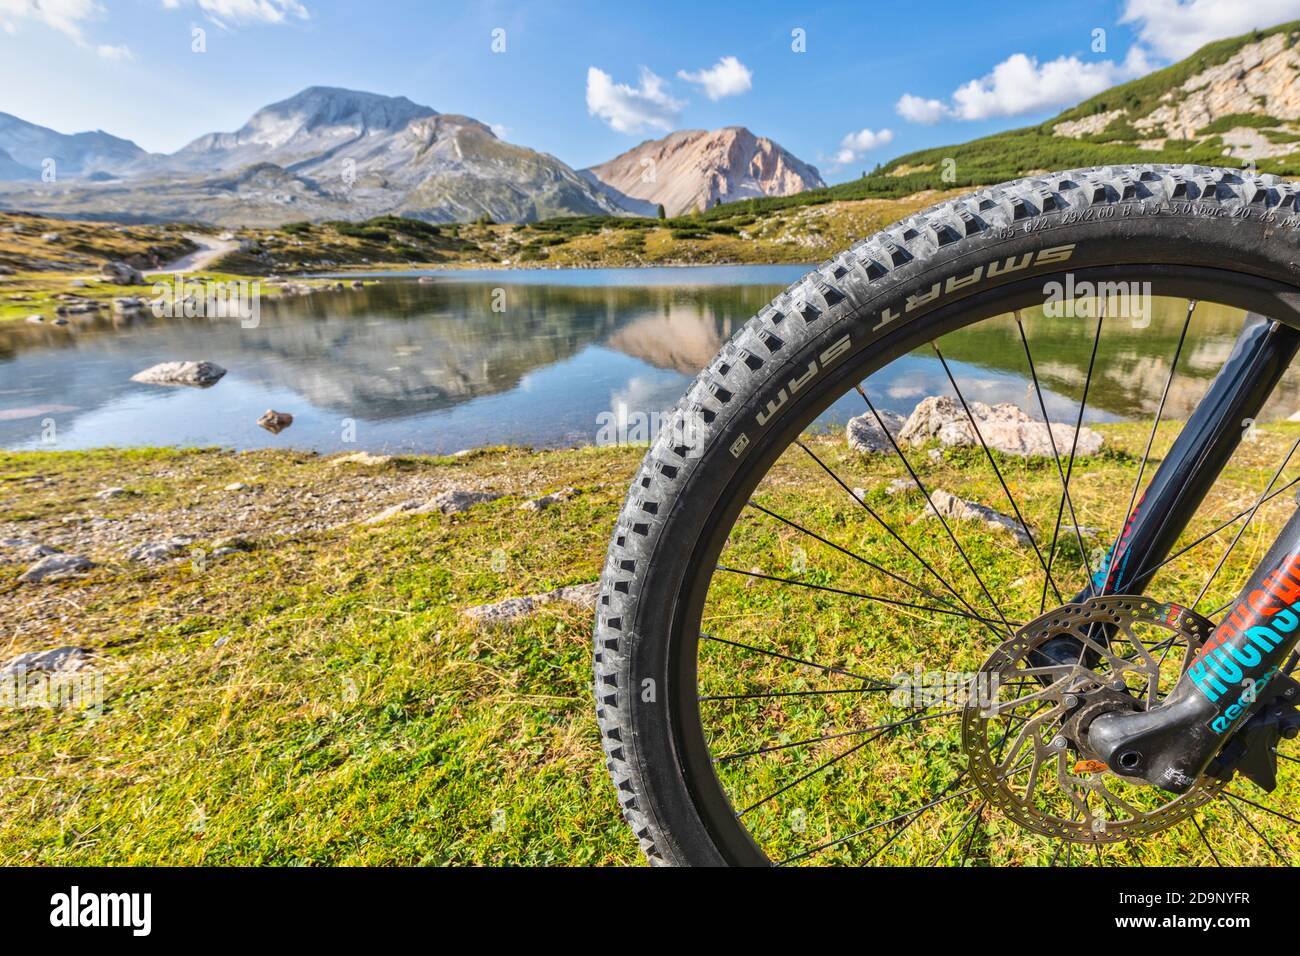 mtb bicycle tire and rim, Limo lake in the background, Dolomites of Fanes  Sennes Braies, San